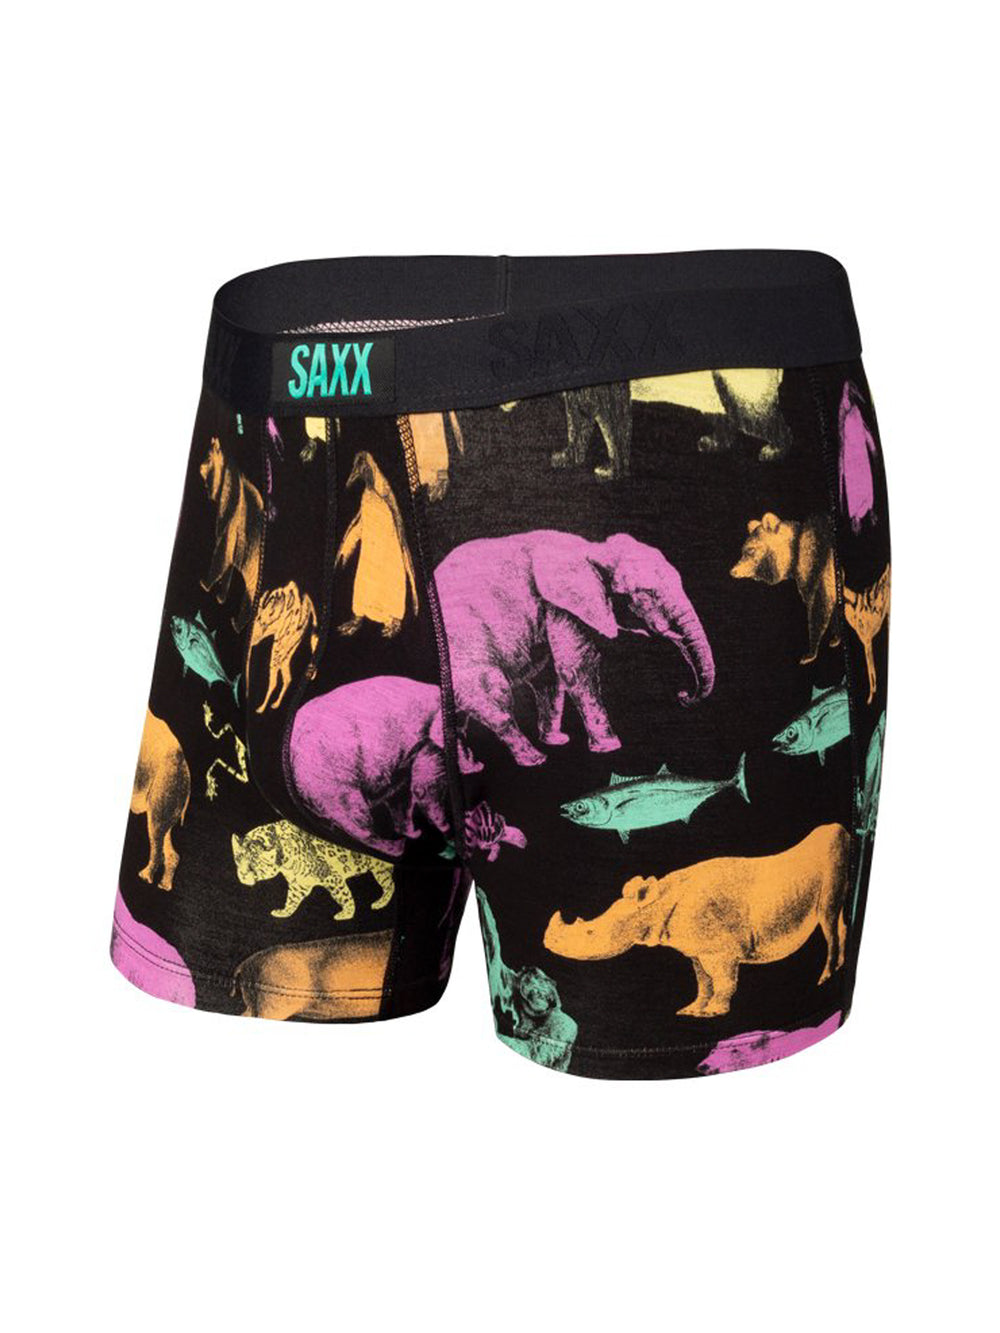 SAXX VIBE BOXER BRIEF - BLACK ENDANGERED - CLEARANCE